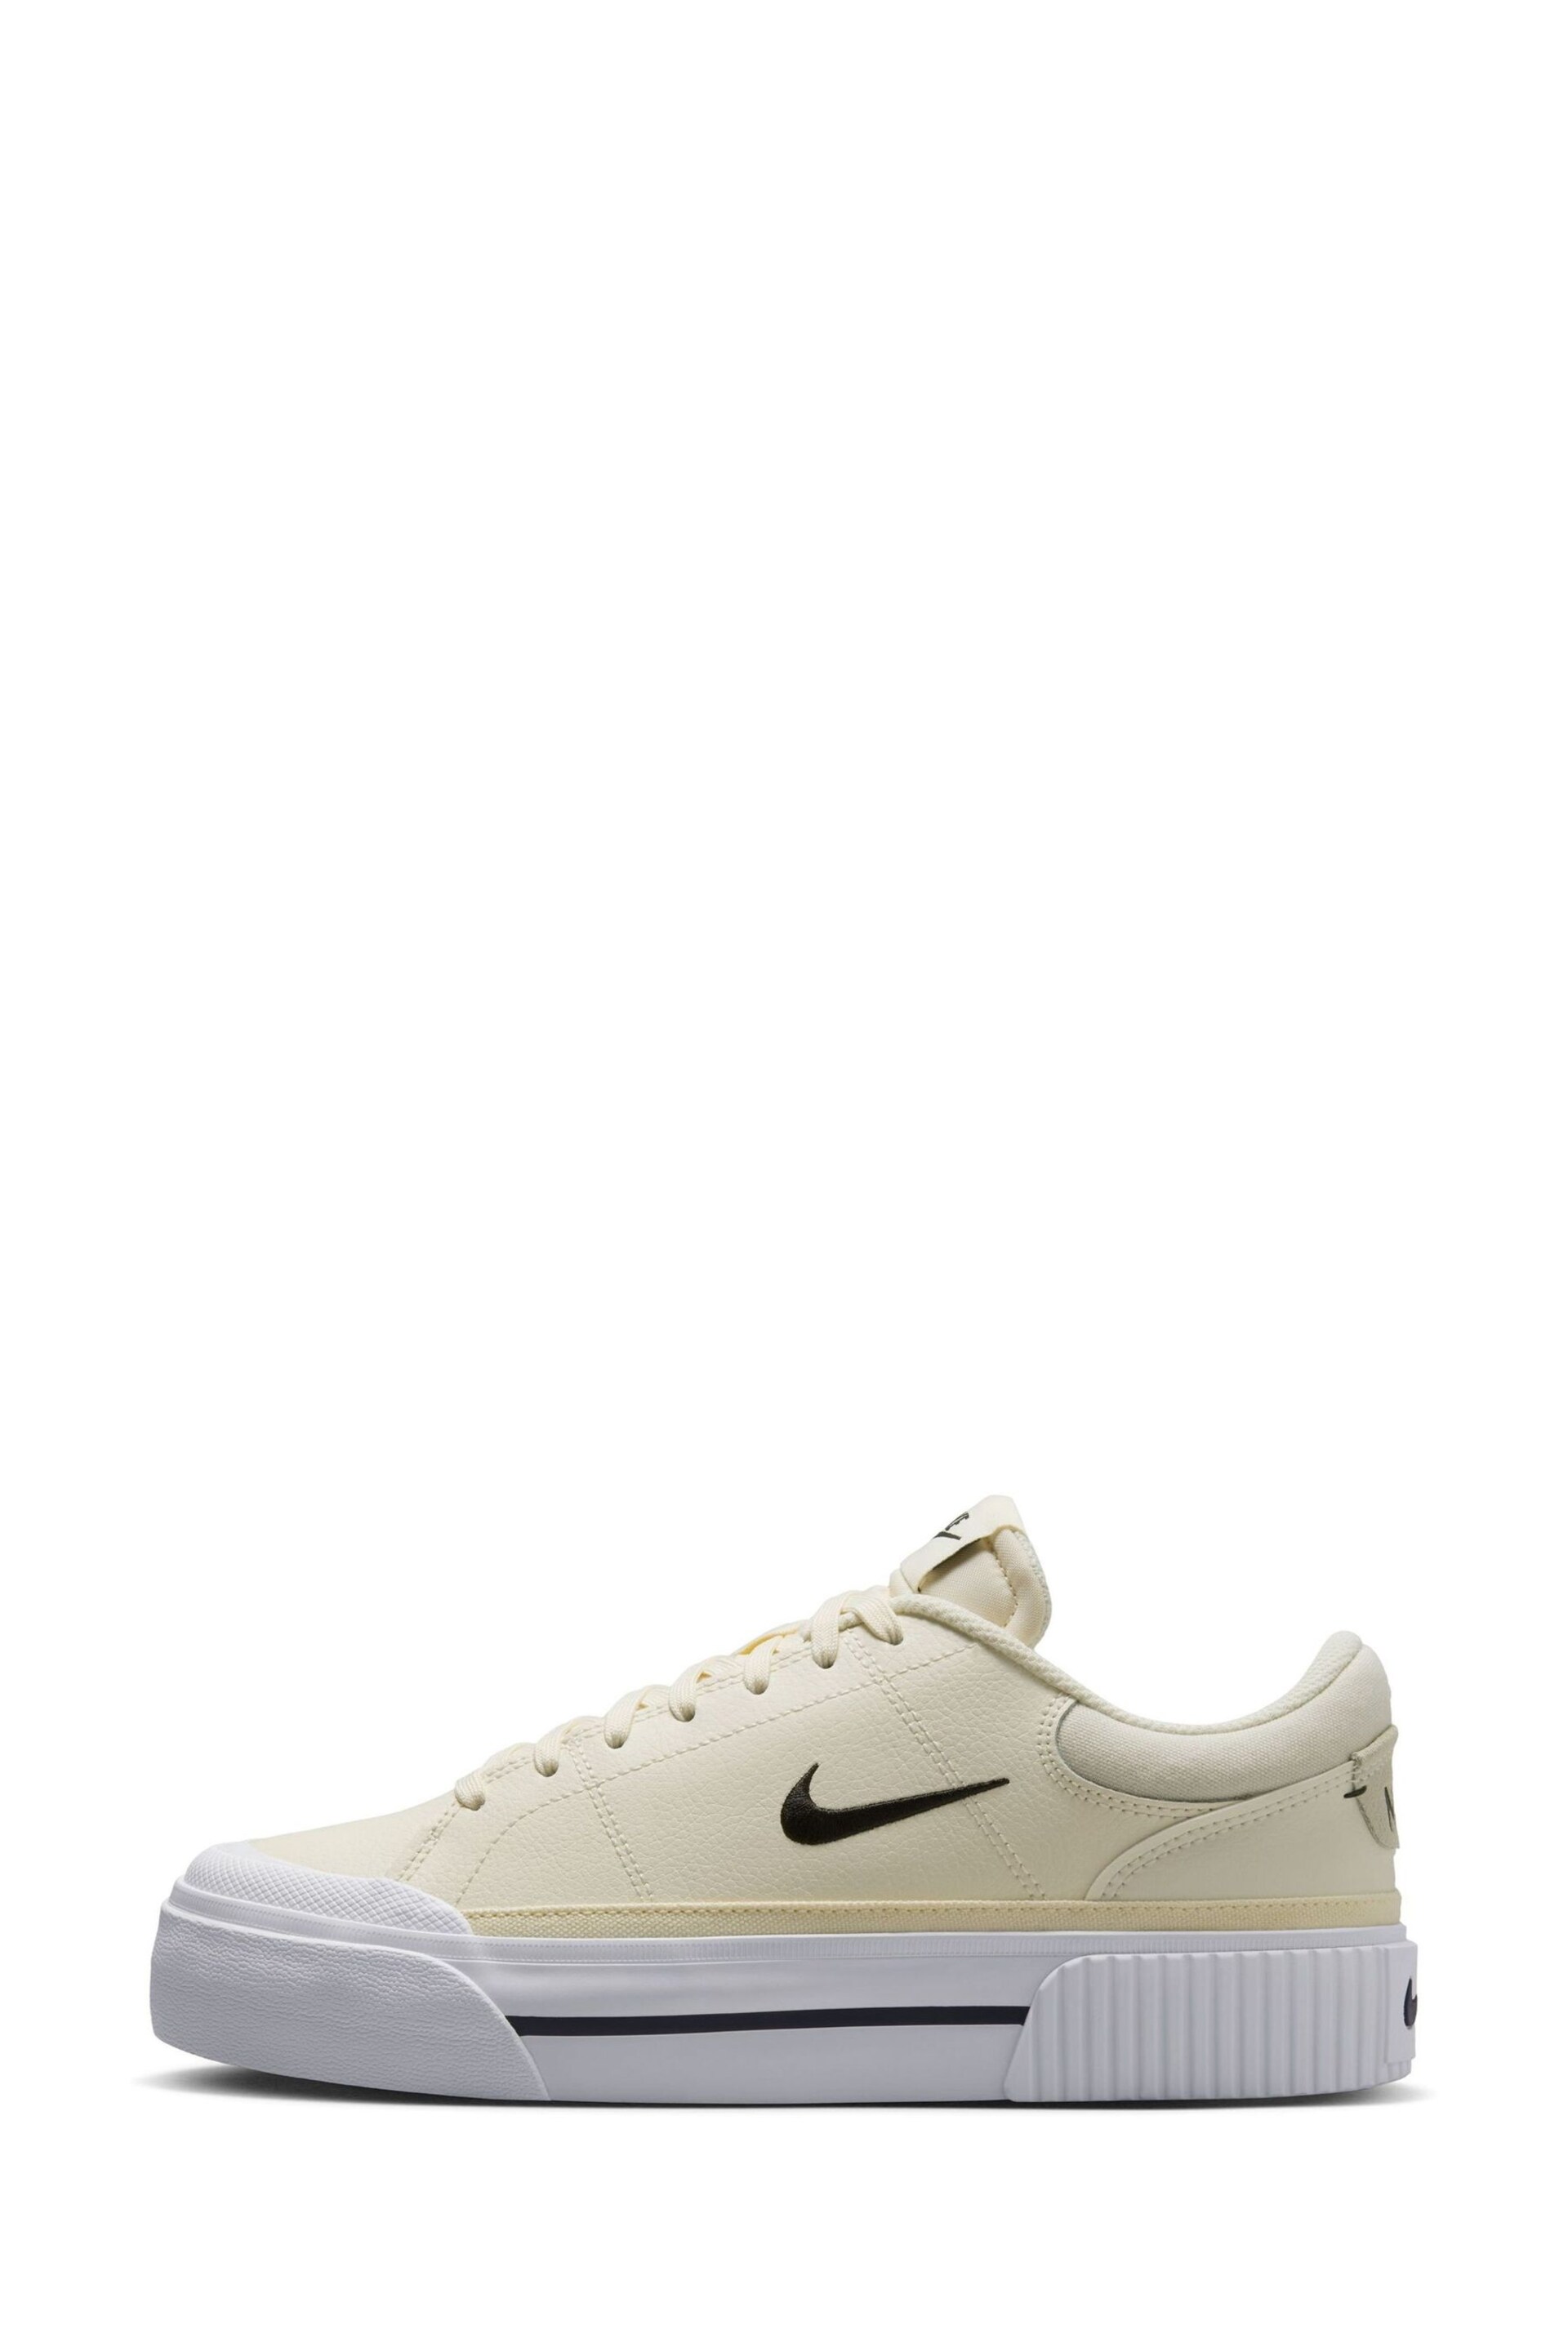 Nike White cream Court Legacy Lift Trainers - Image 3 of 14